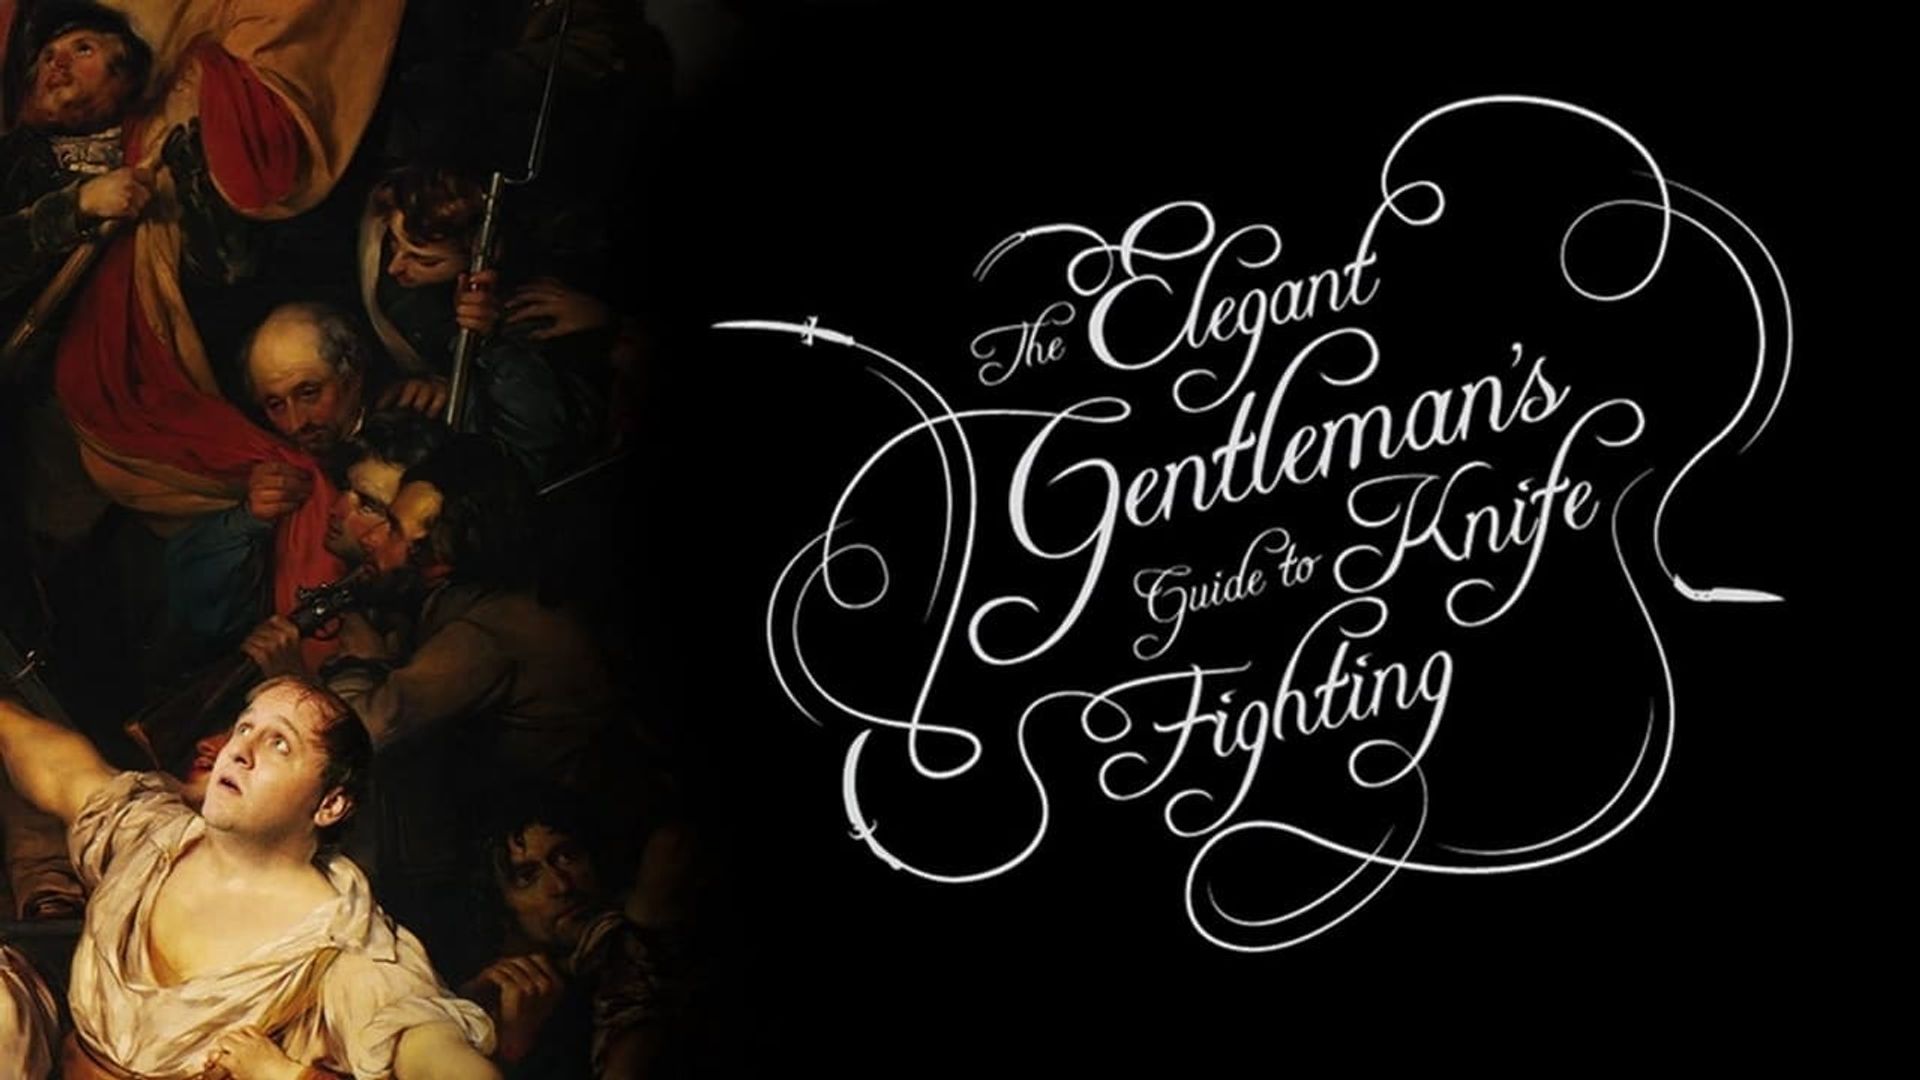 The Elegant Gentleman's Guide to Knife Fighting background